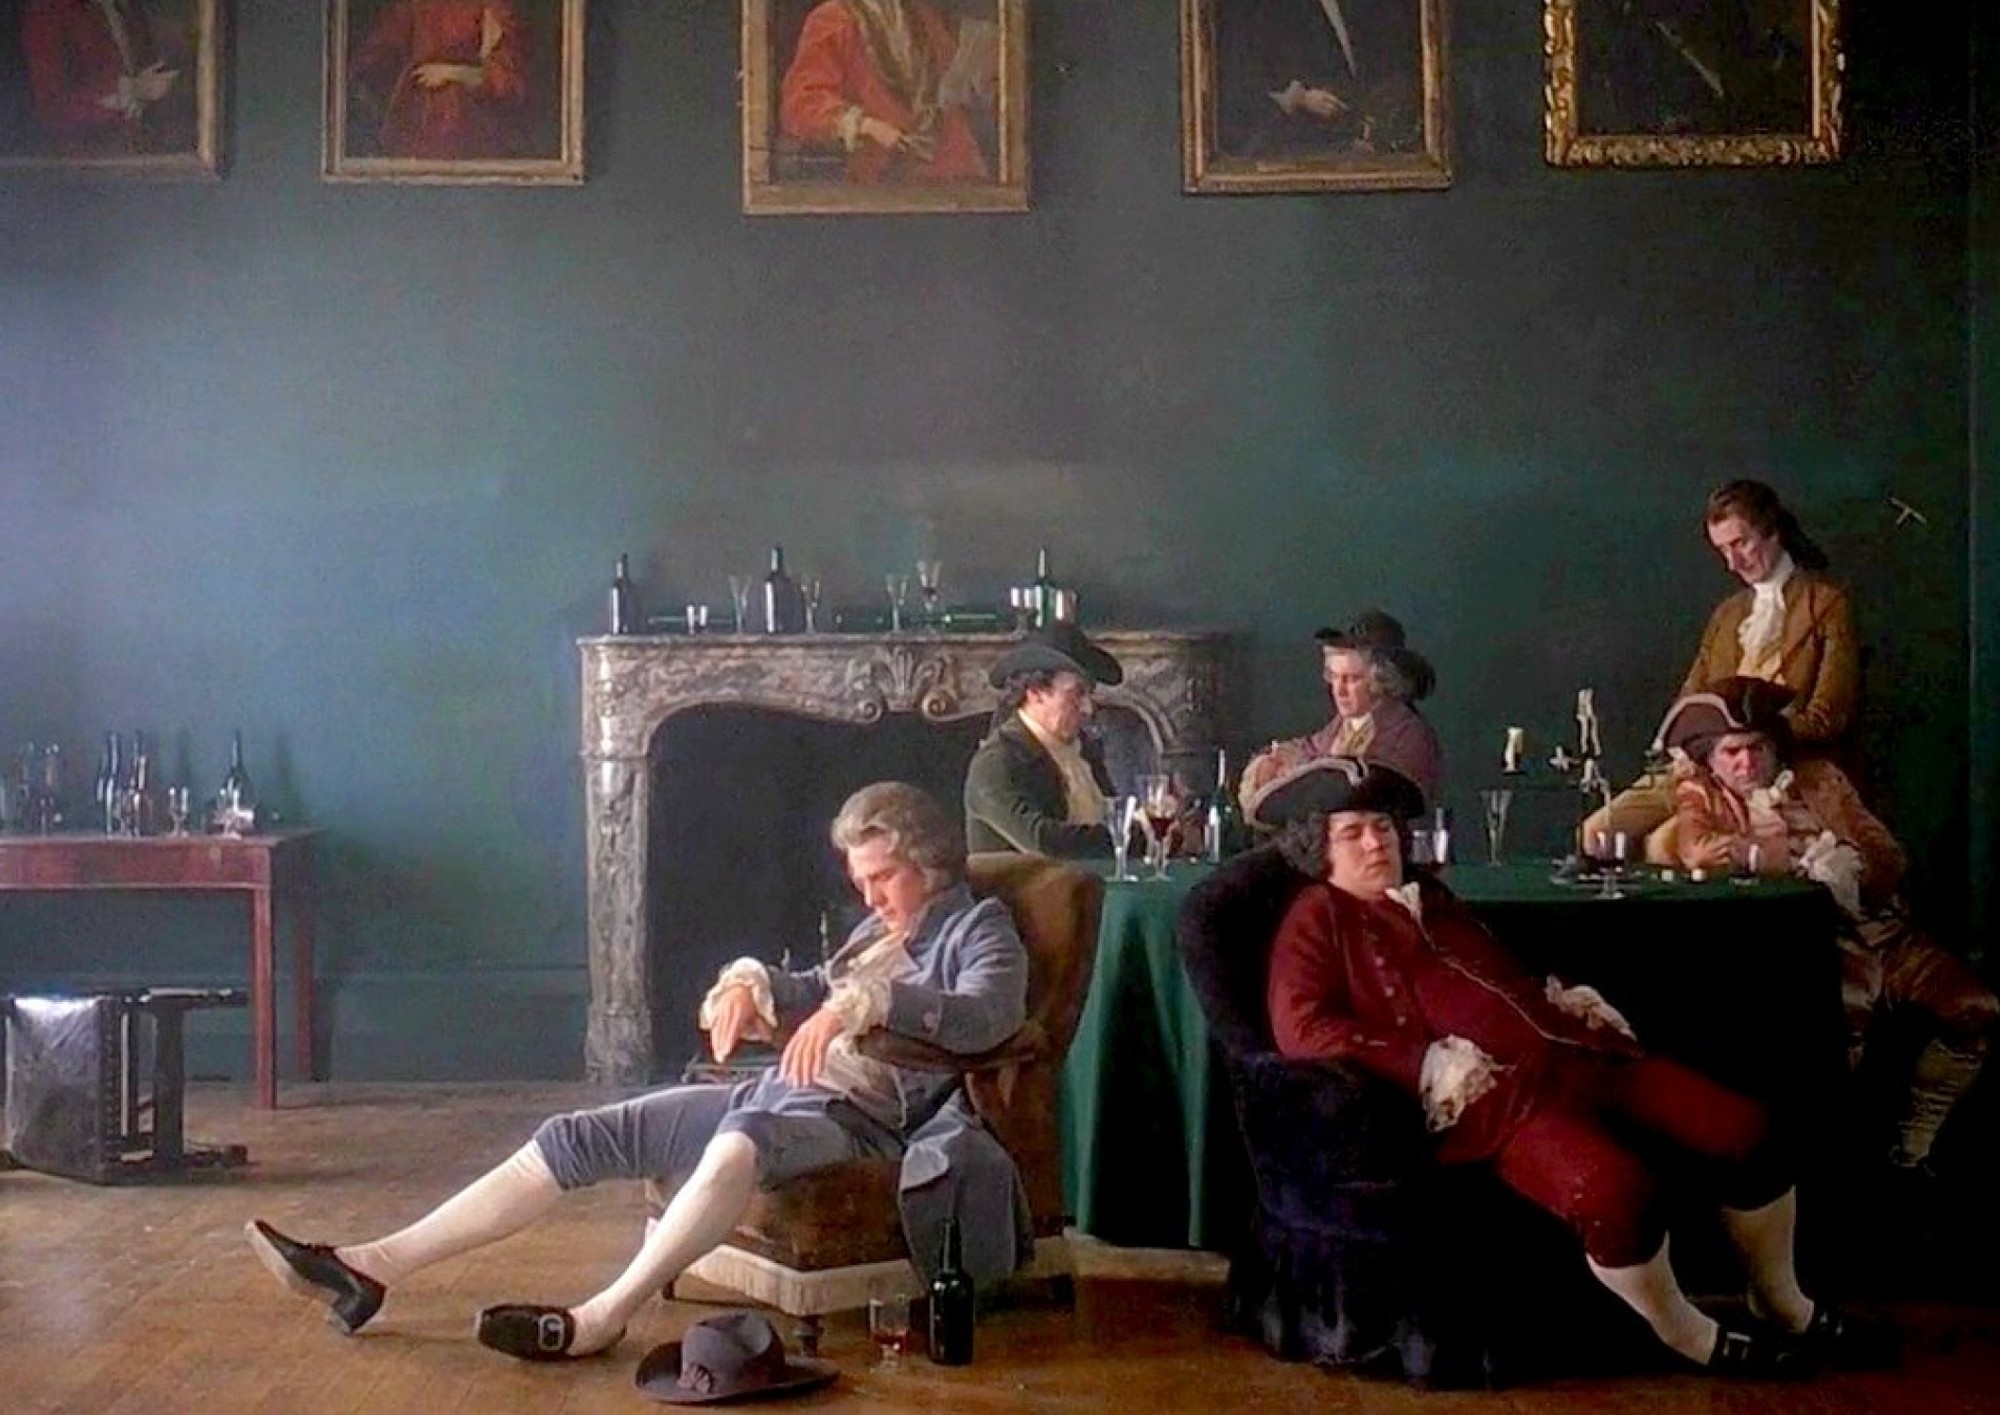 Image from the motion picture Barry Lyndon